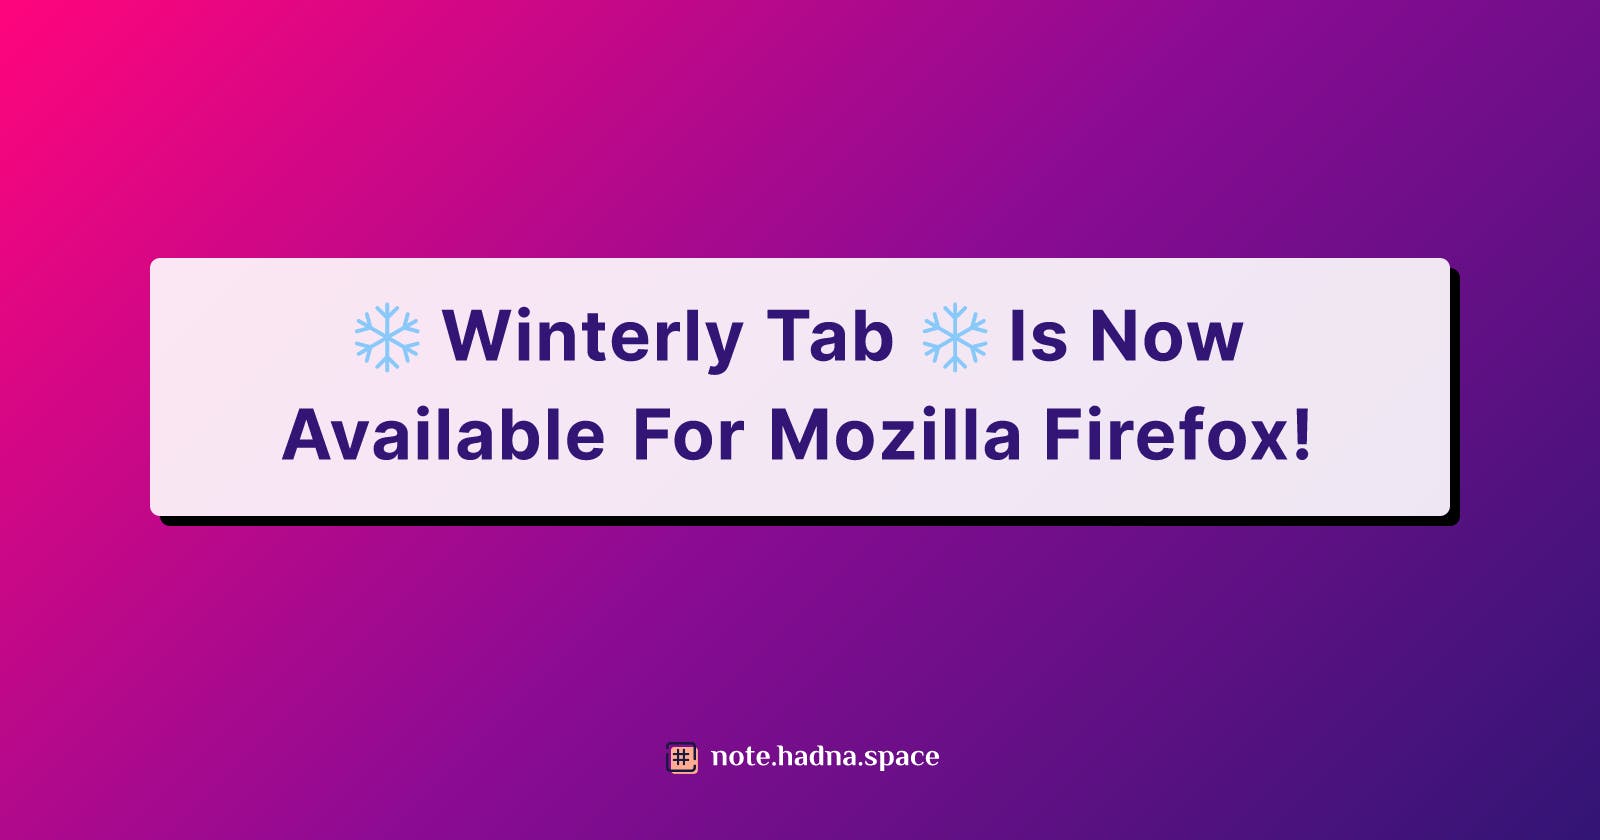 ❄️ Winterly Tab ❄️ Is Now Available For Mozilla Firefox!